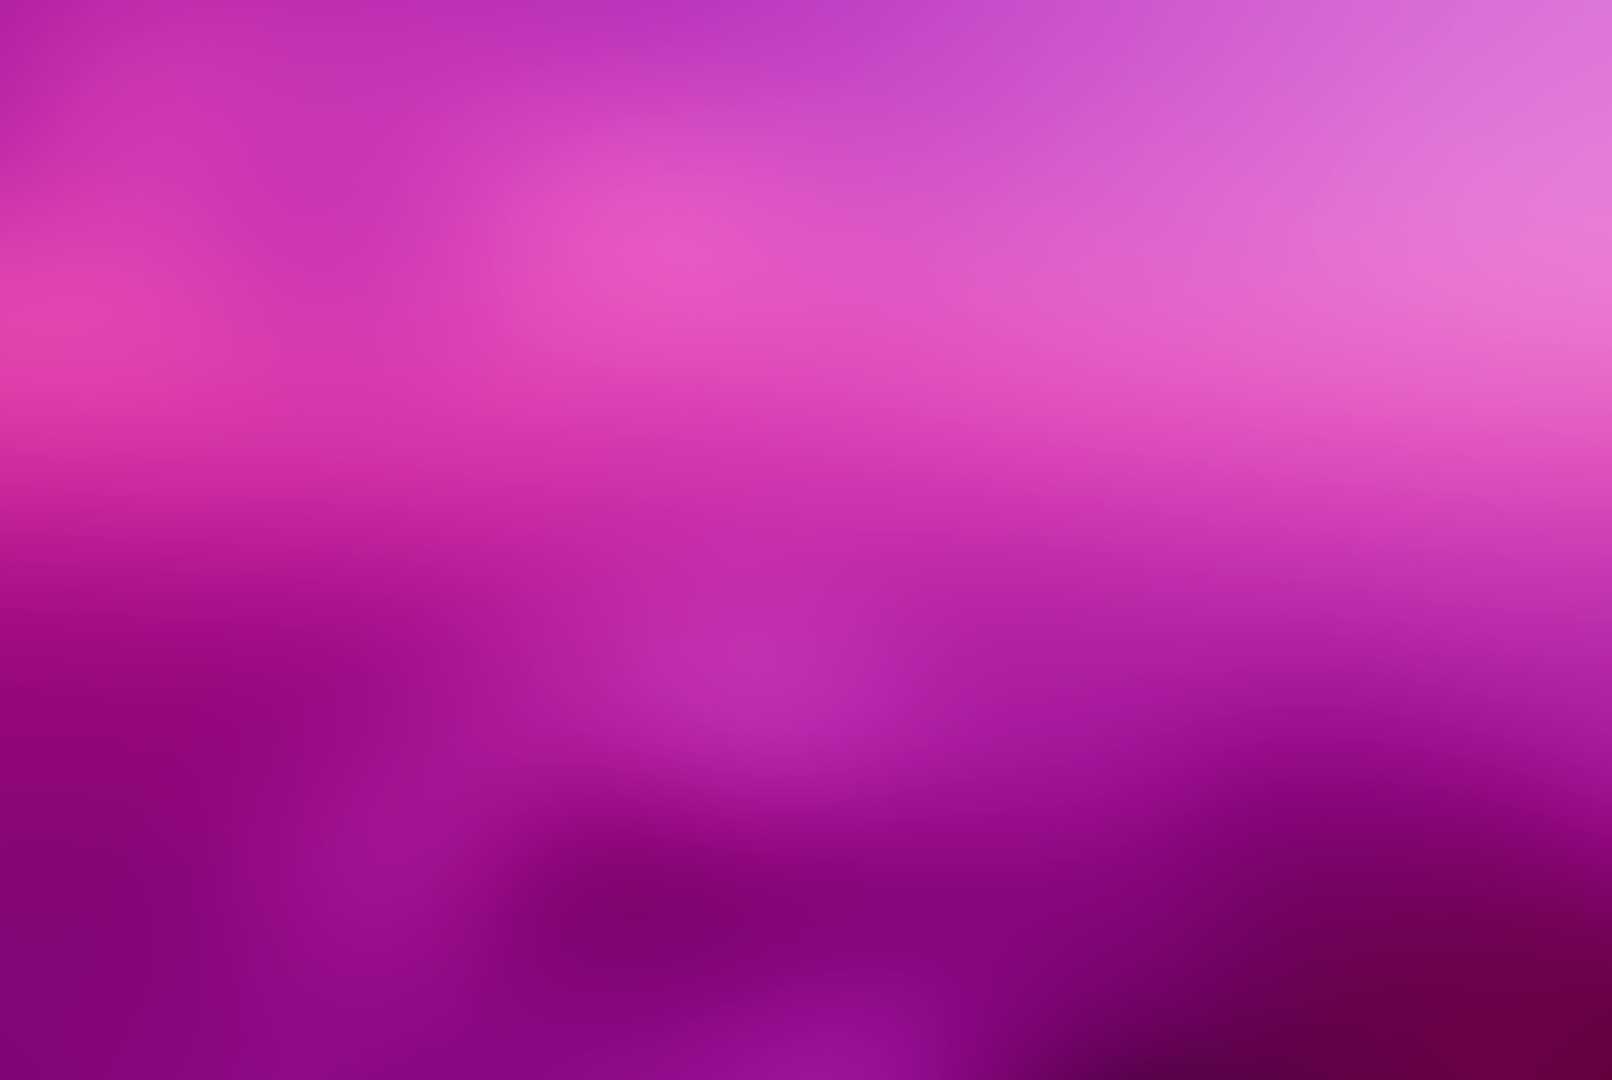 Fuschia and Pink Background Image 1612x1080